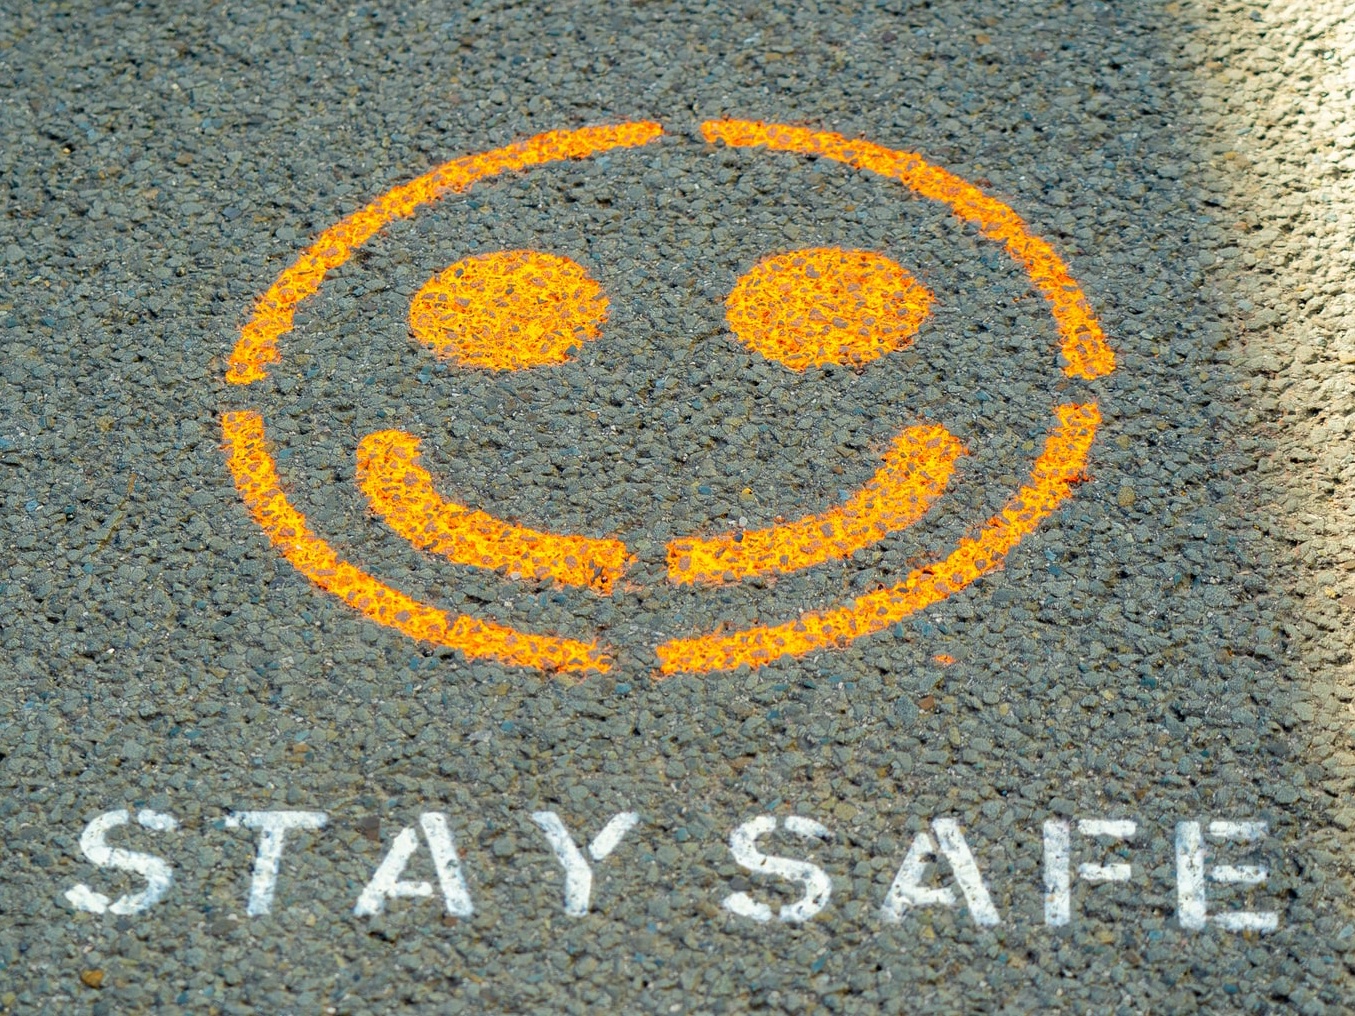 A smiley and the words "stay safe" written on a road